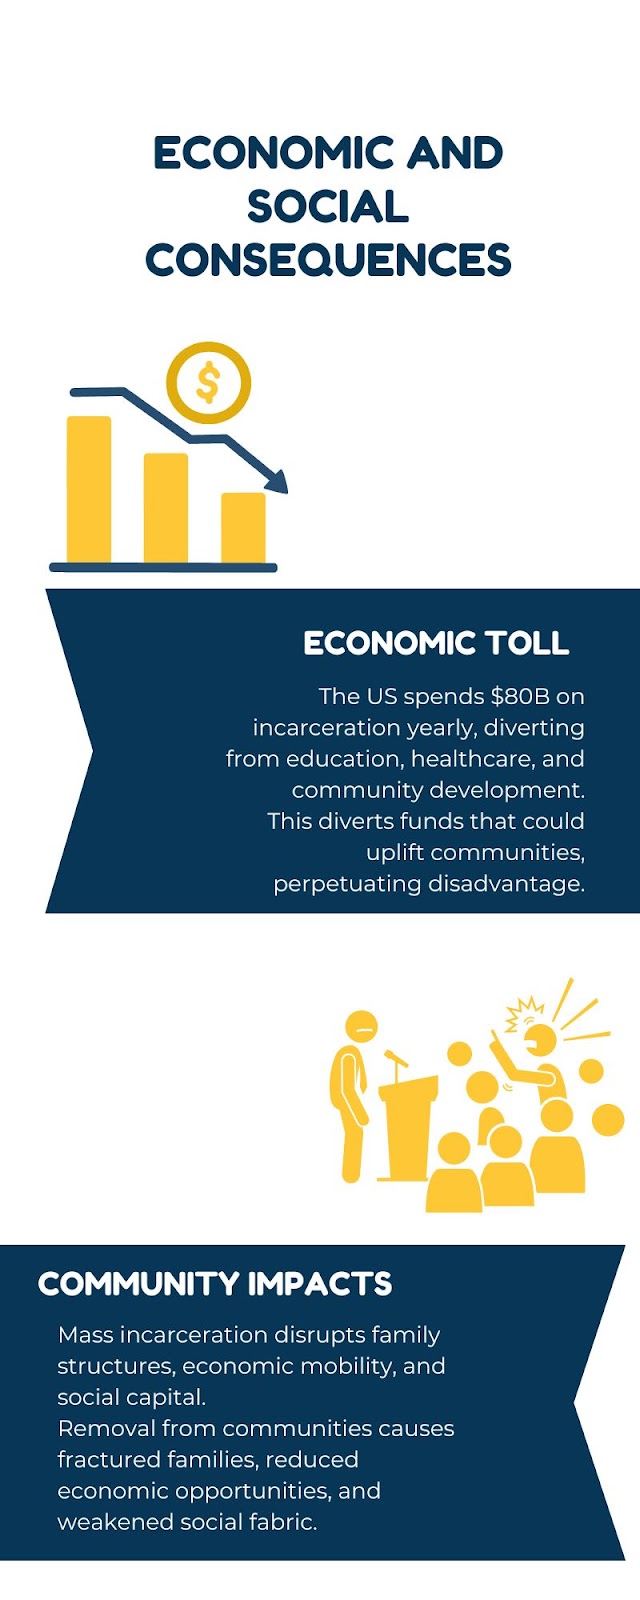 Economic and Social Consequences:
1) Economic Toll
2) Community Impacts